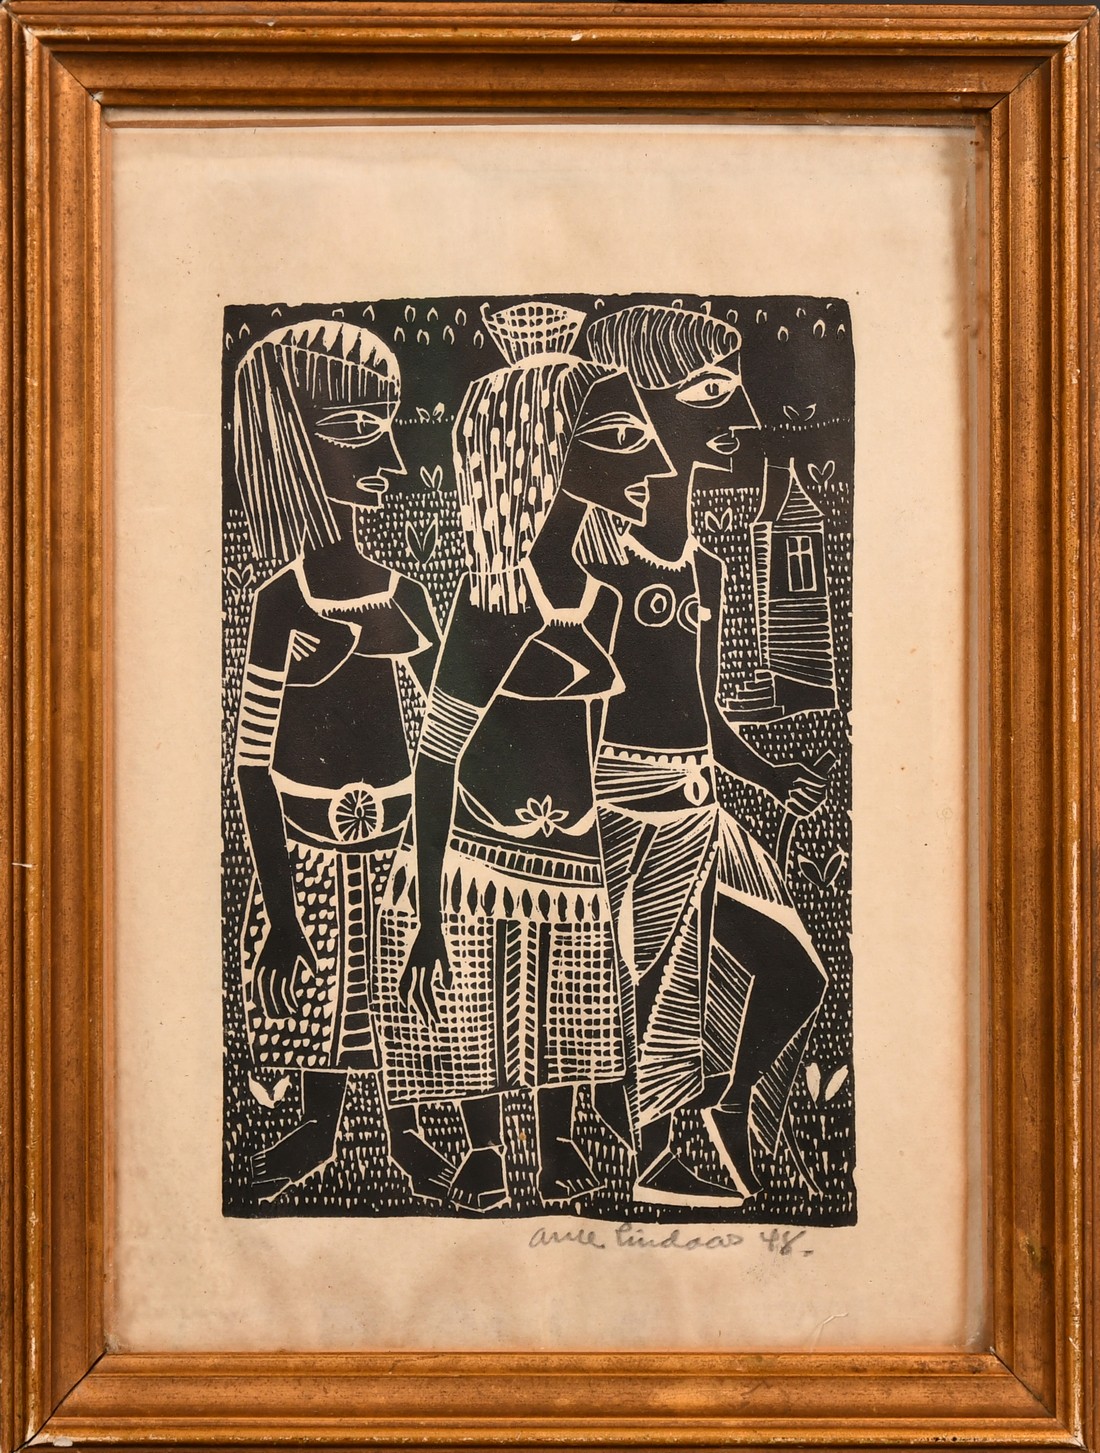 Arne Lindaas, three native figures, wood engraving, signed in pencil and dated 48, image size 5. - Image 2 of 4